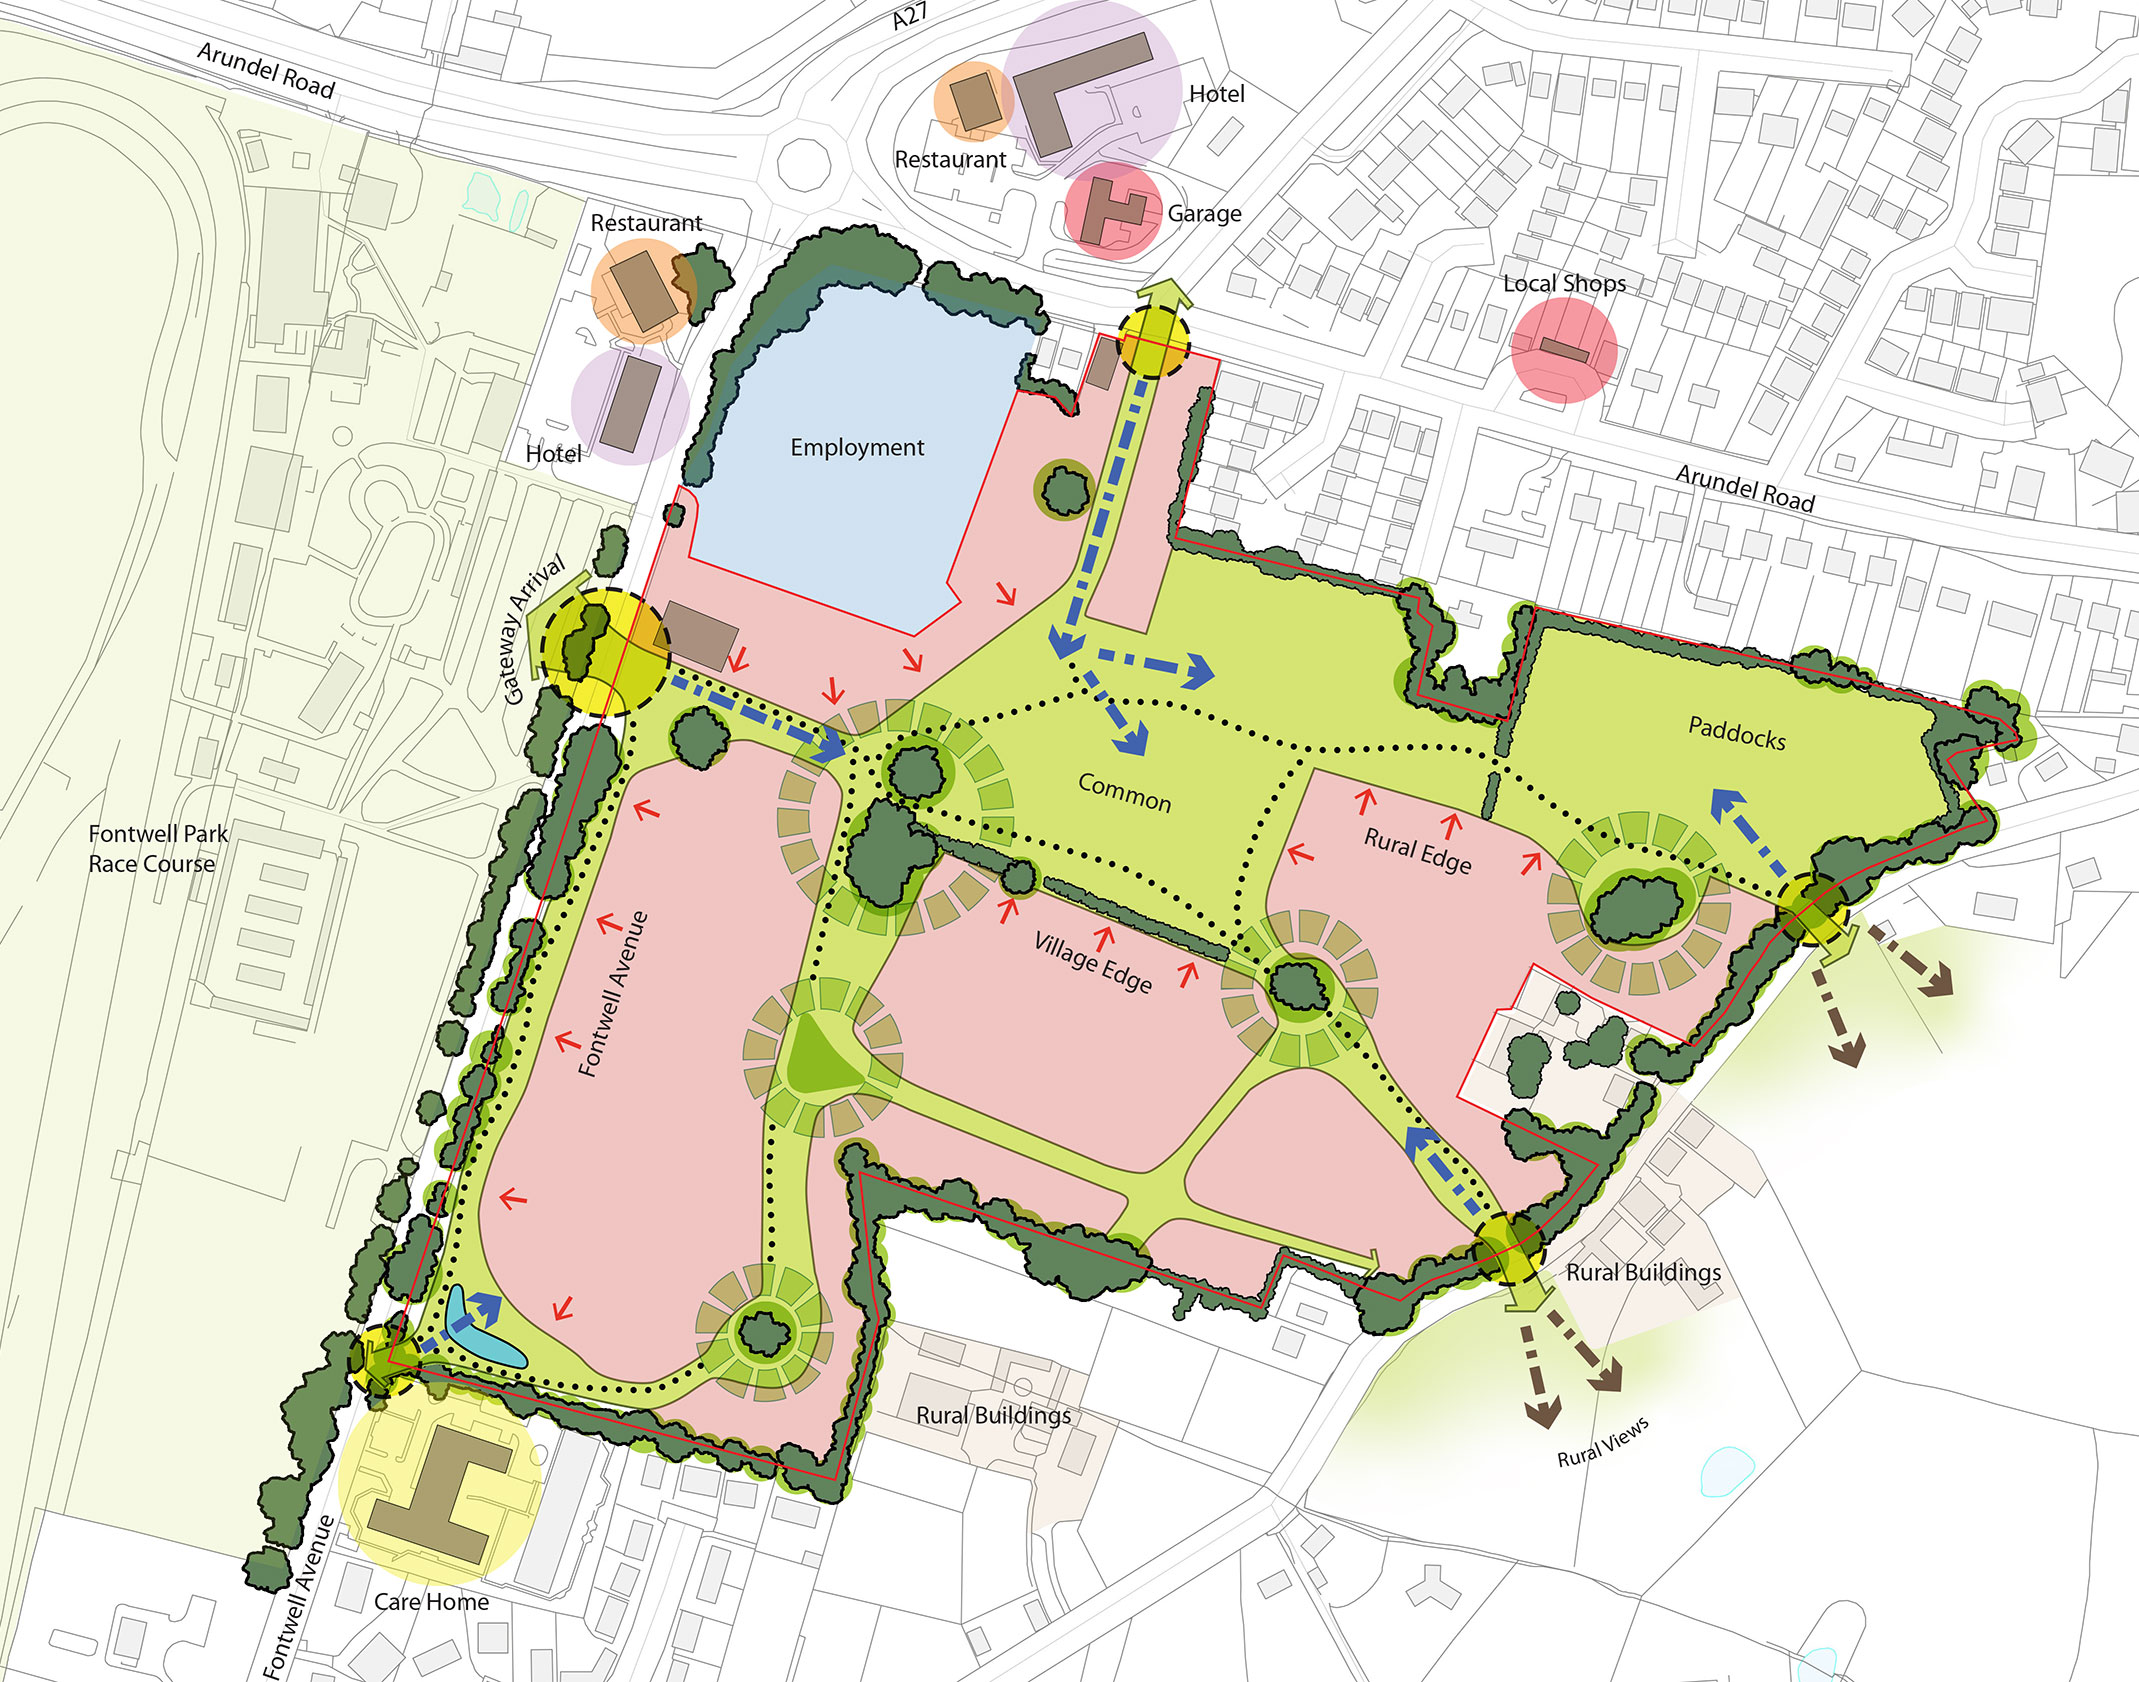 Planning application for land at Fontwell